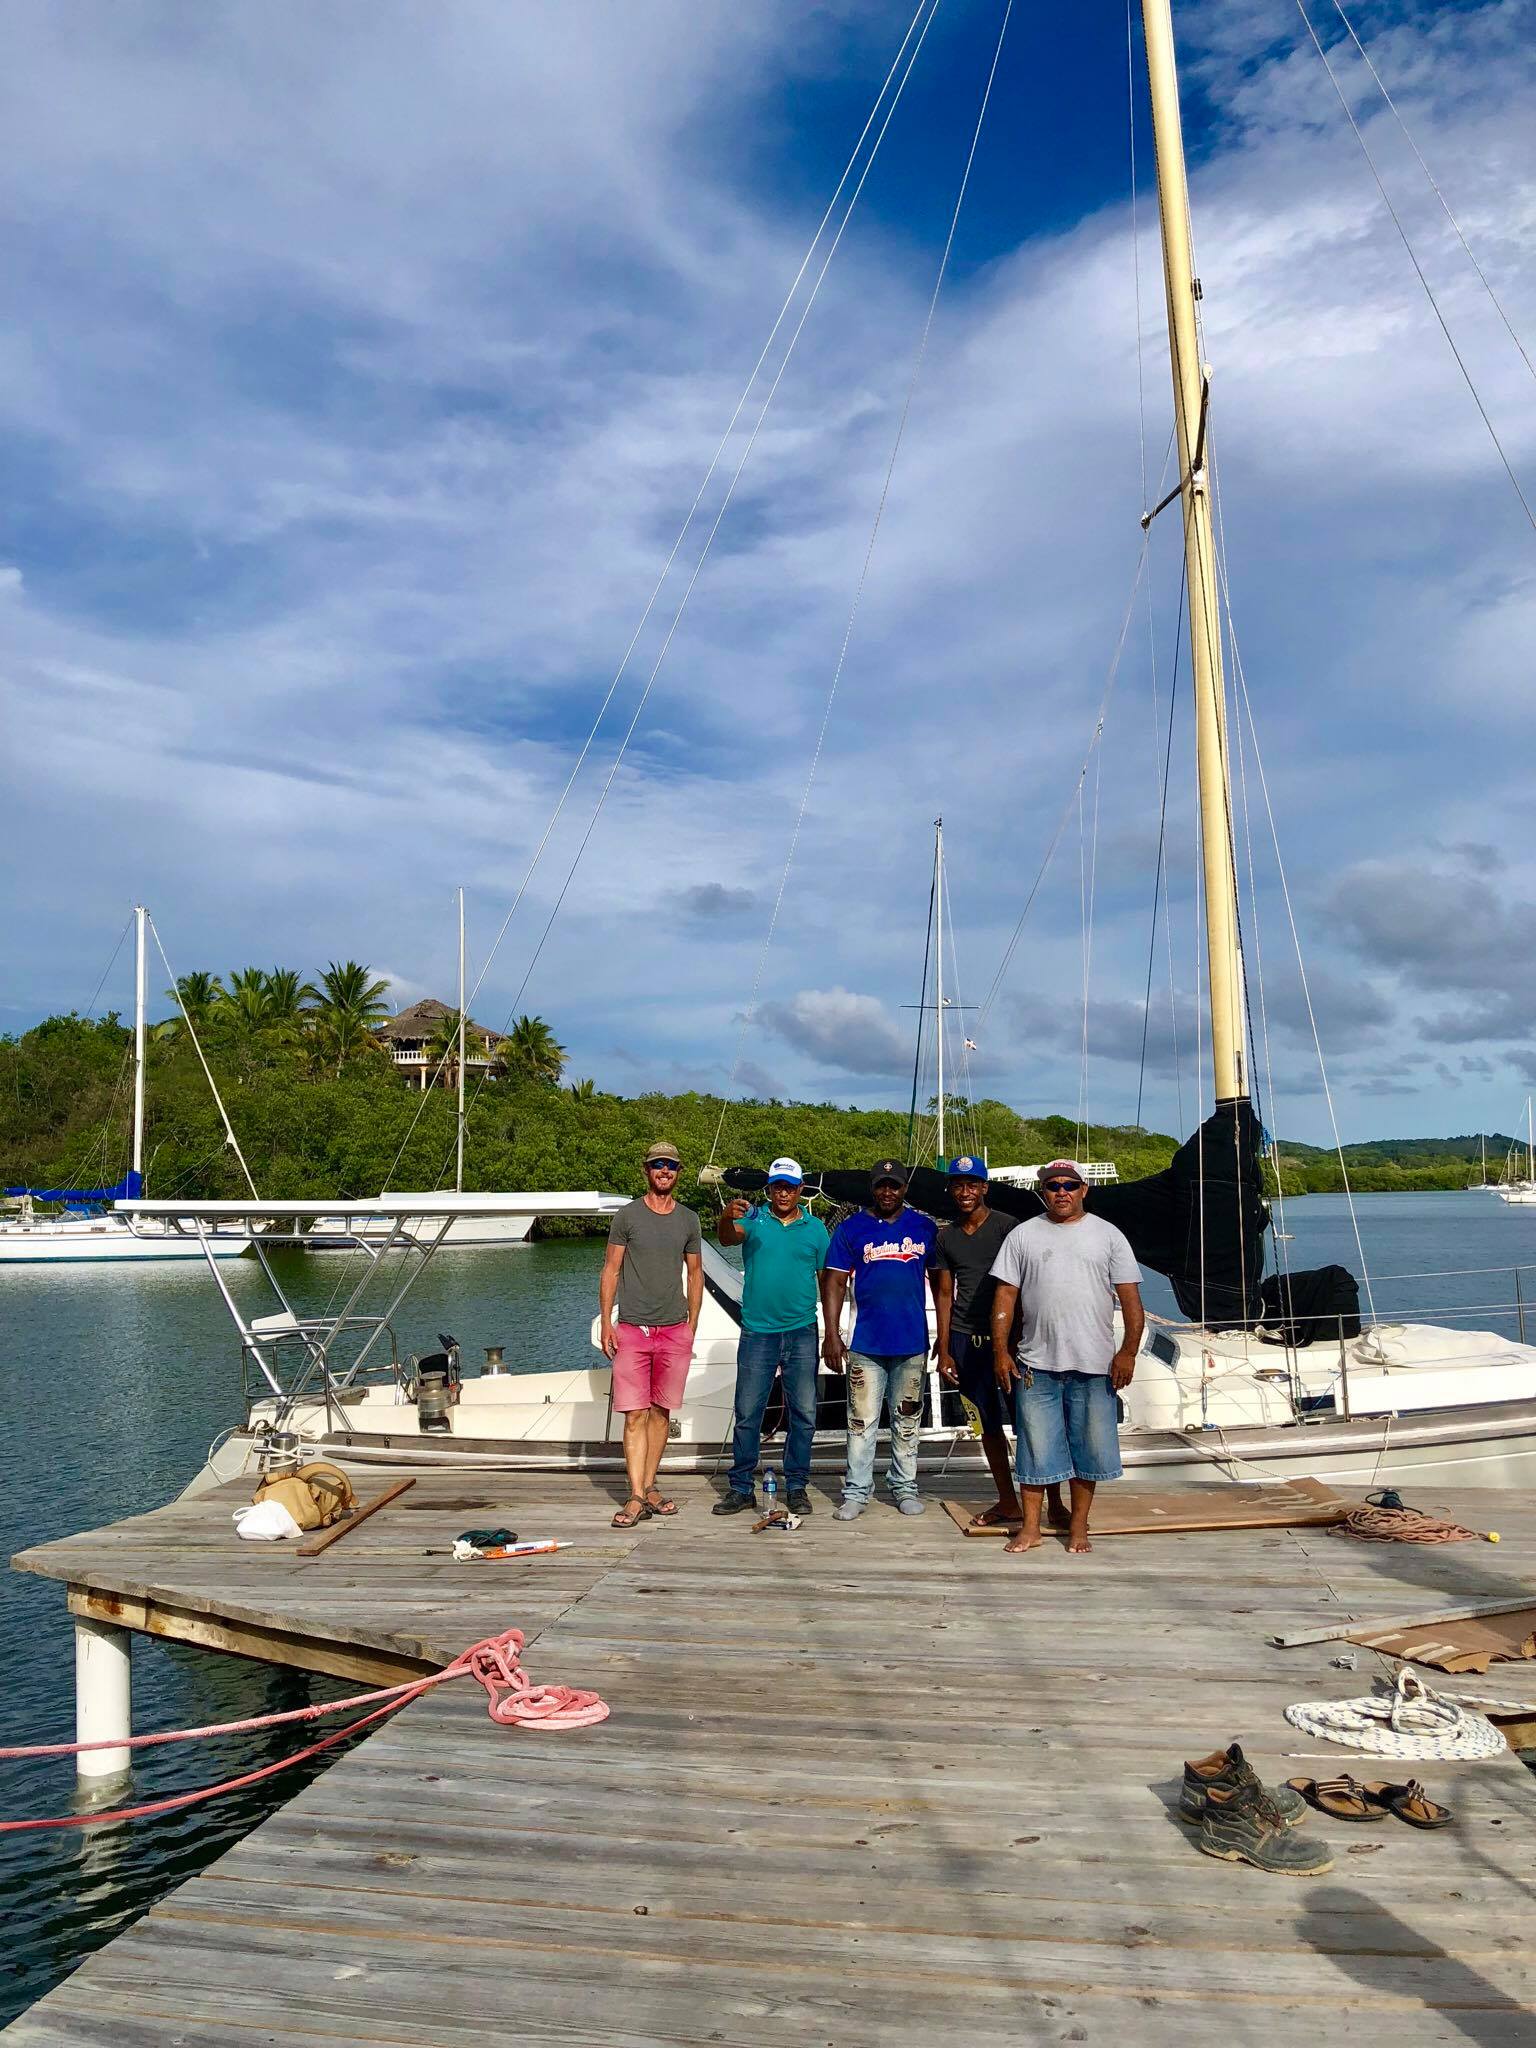 Liveaboard Life Day 250: Hello from Luperon, Dominican Republic!